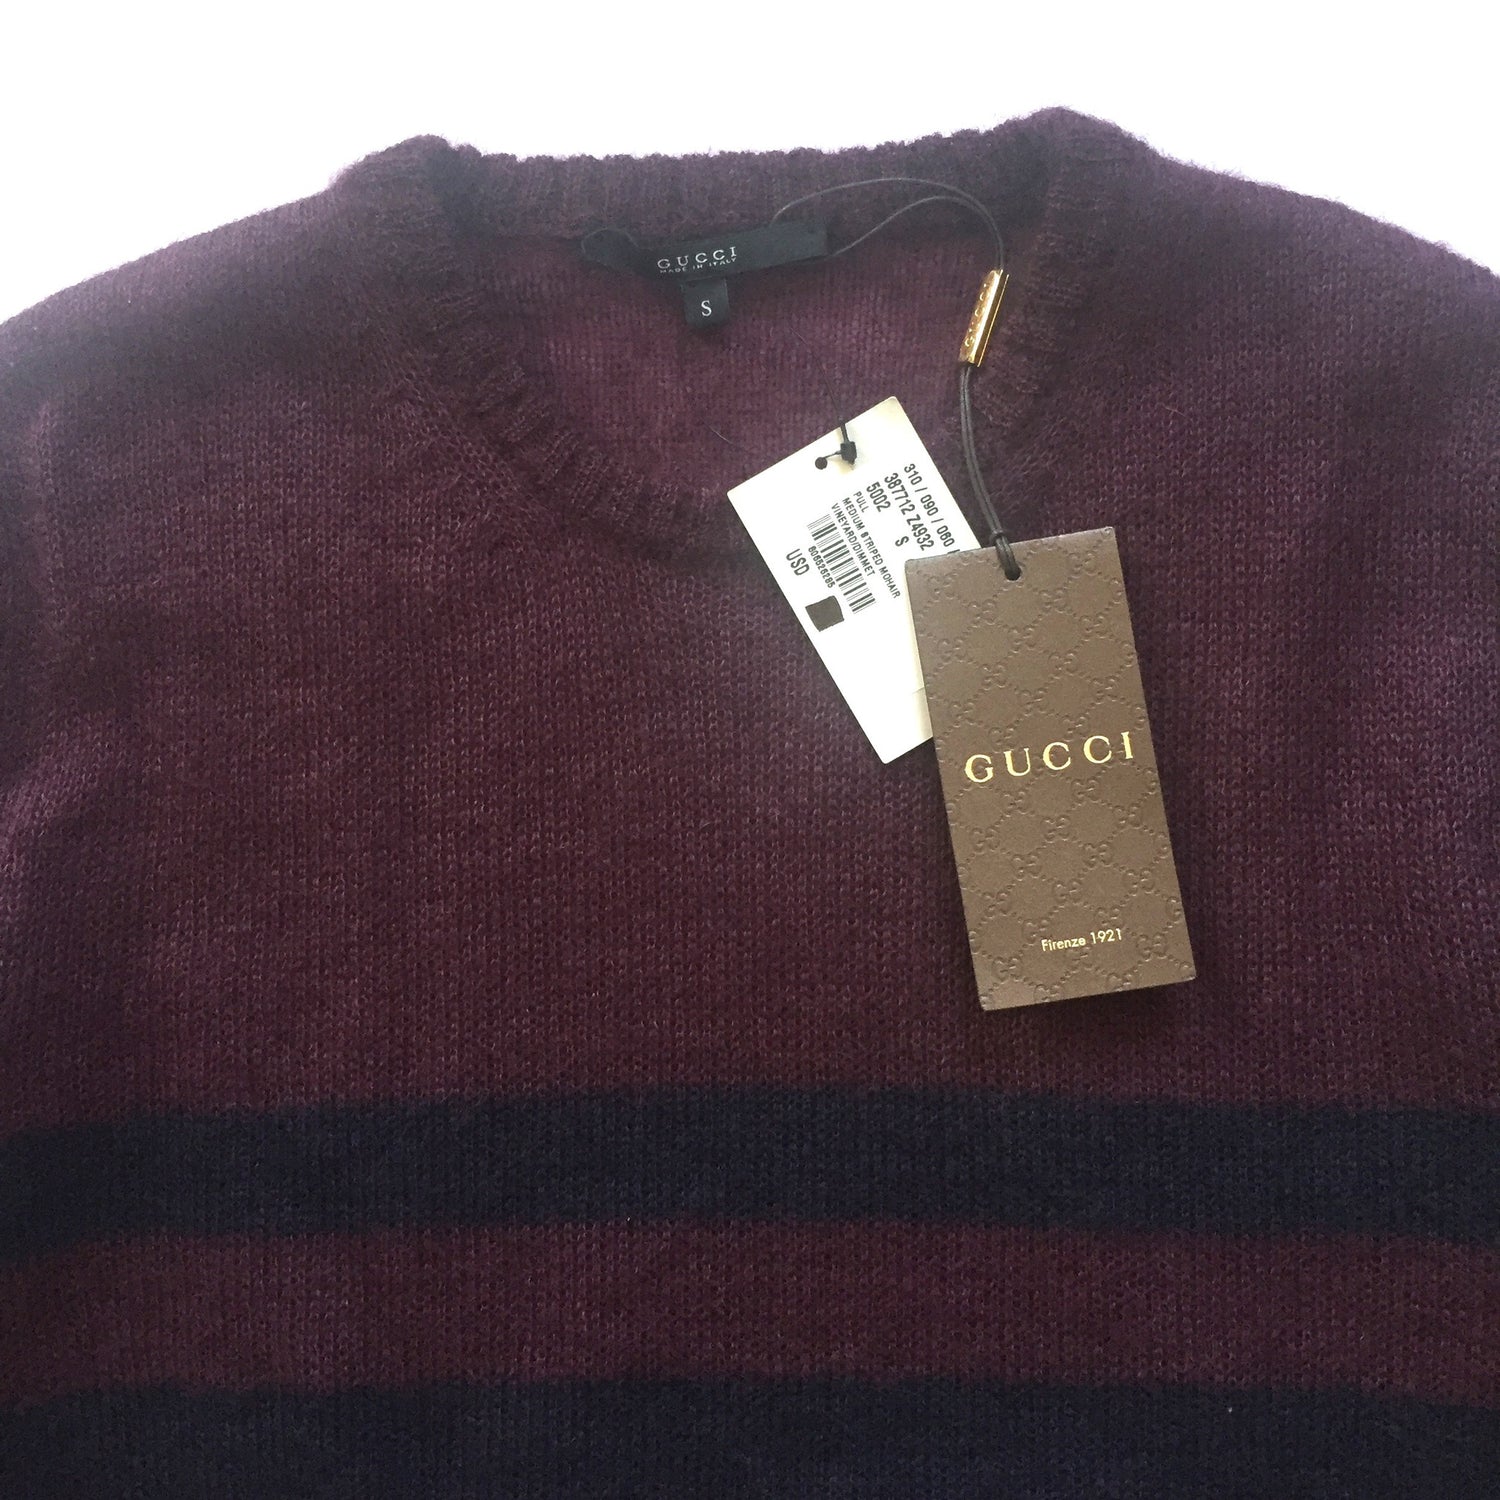 Gucci - Men's Navy & Red Nautical Striped Mohair & Silk Sweater